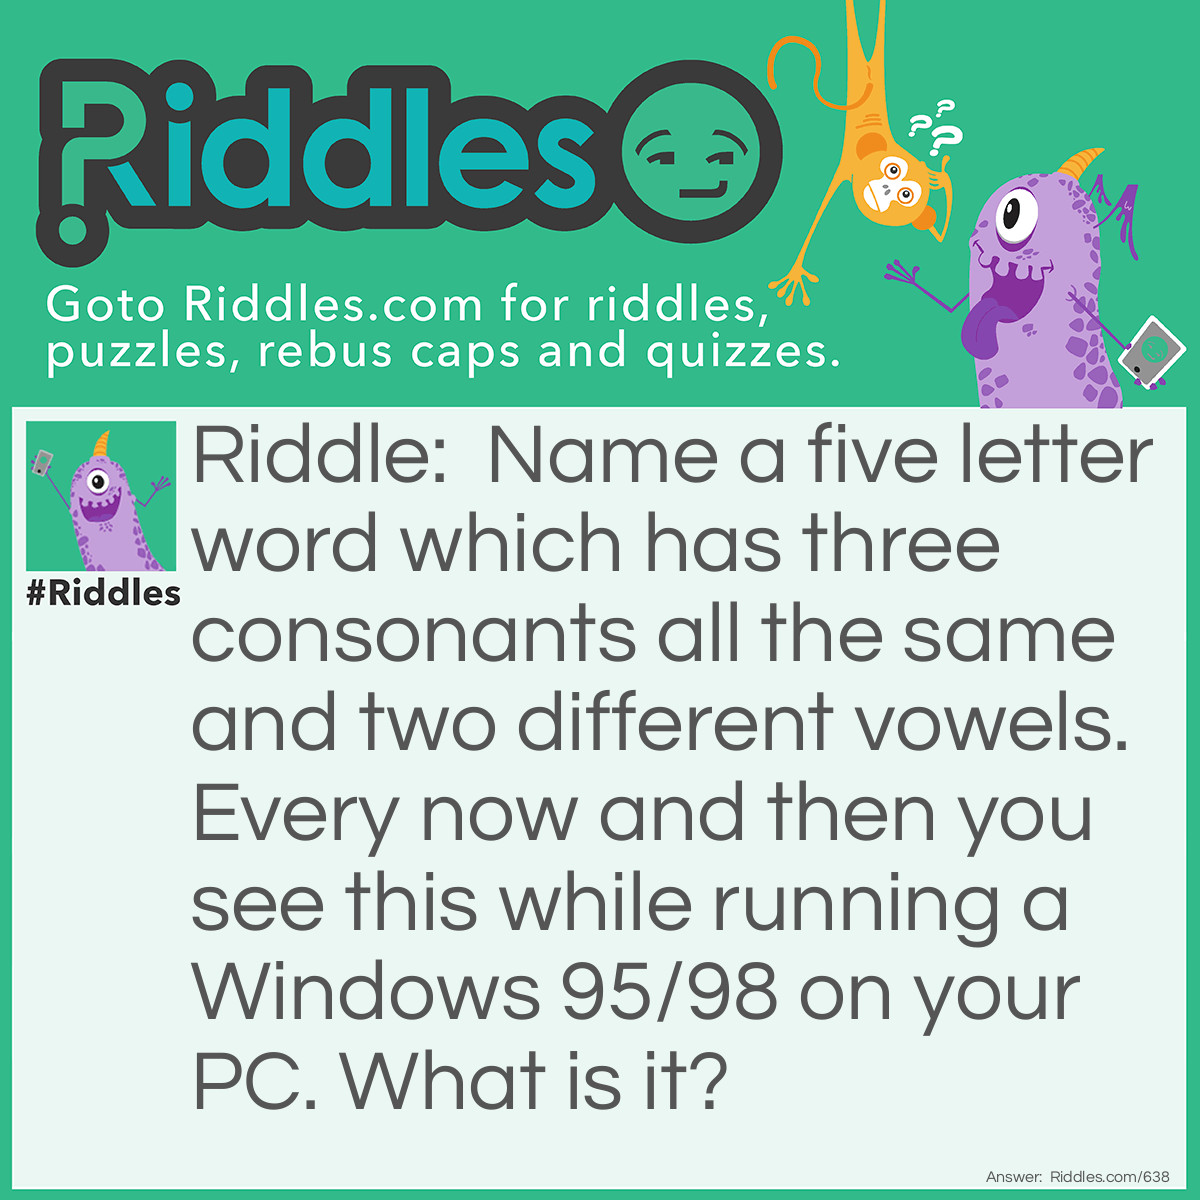 Riddle: Name a five letter word which has three consonants all the same and two different vowels. Every now and then you see this while running a Windows 95/98 on your PC. What is it? Answer: Error!